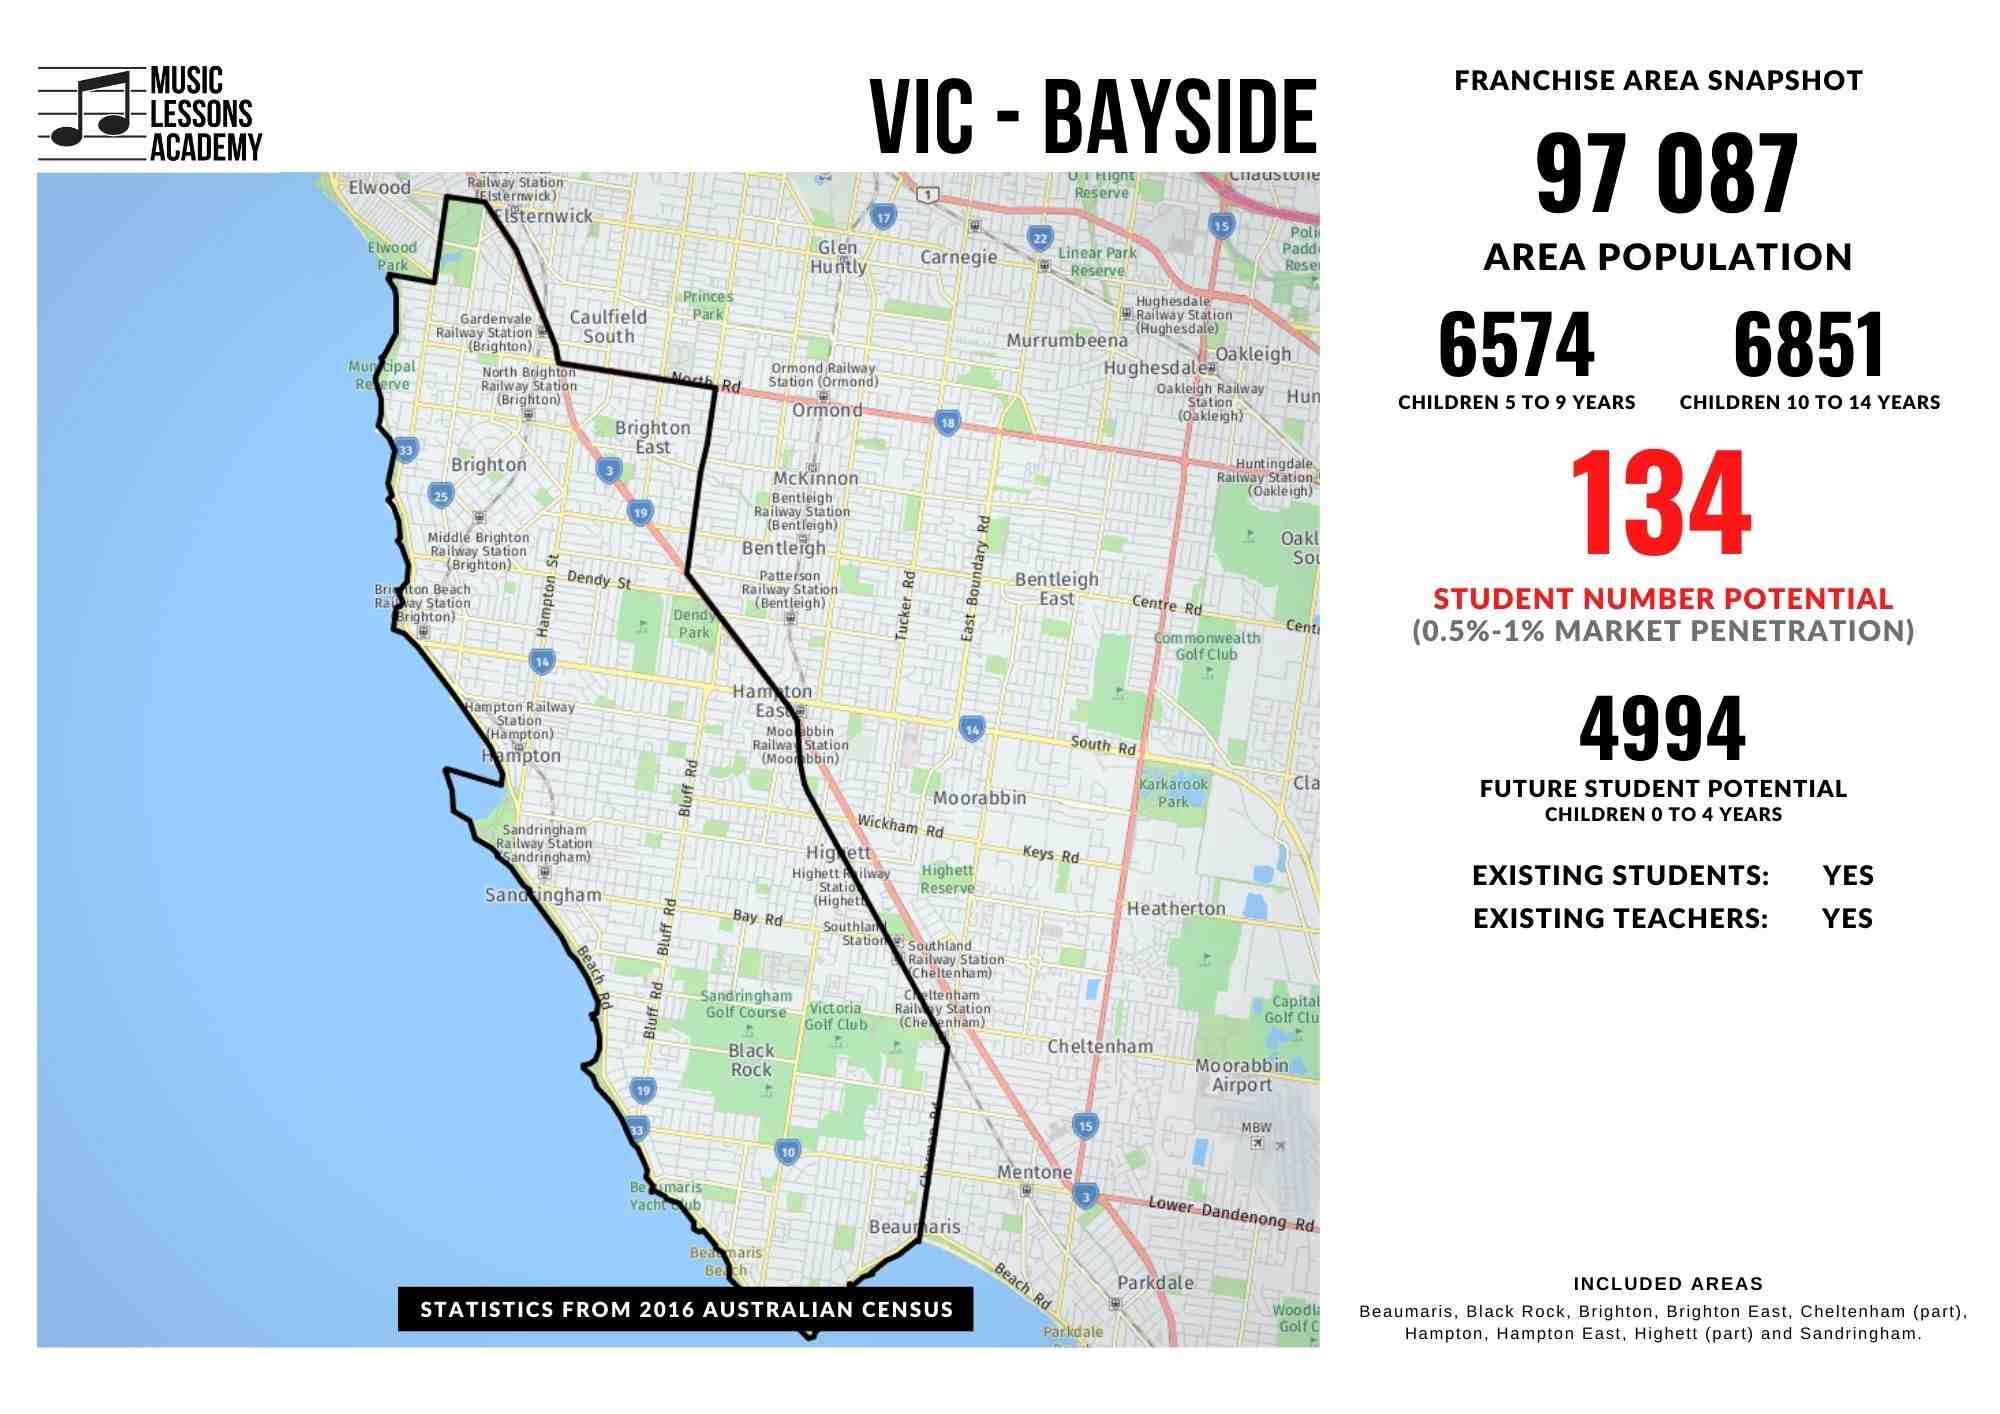 VIC Bayside Brighton Franchise for sale